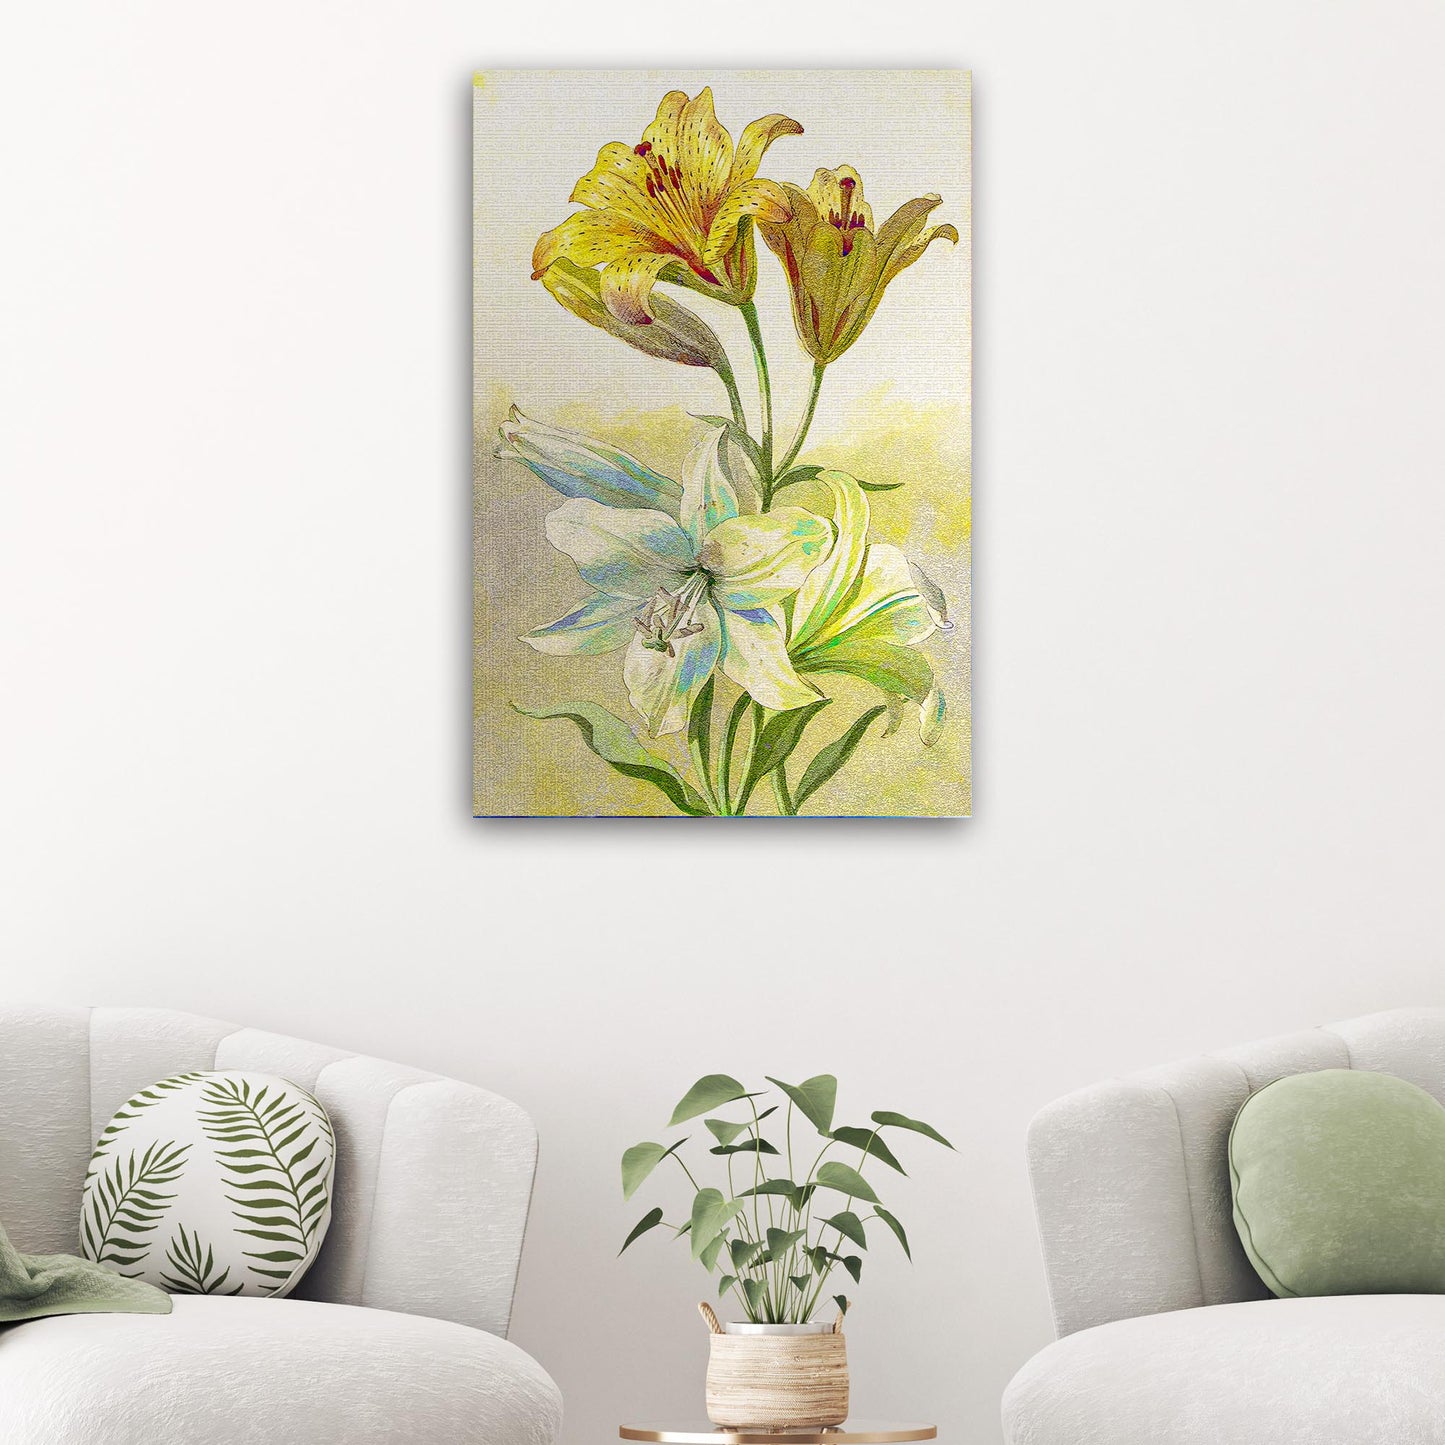 Flowers Daffodils Vintage Canvas Wall Art - Image by Tailored Canvases